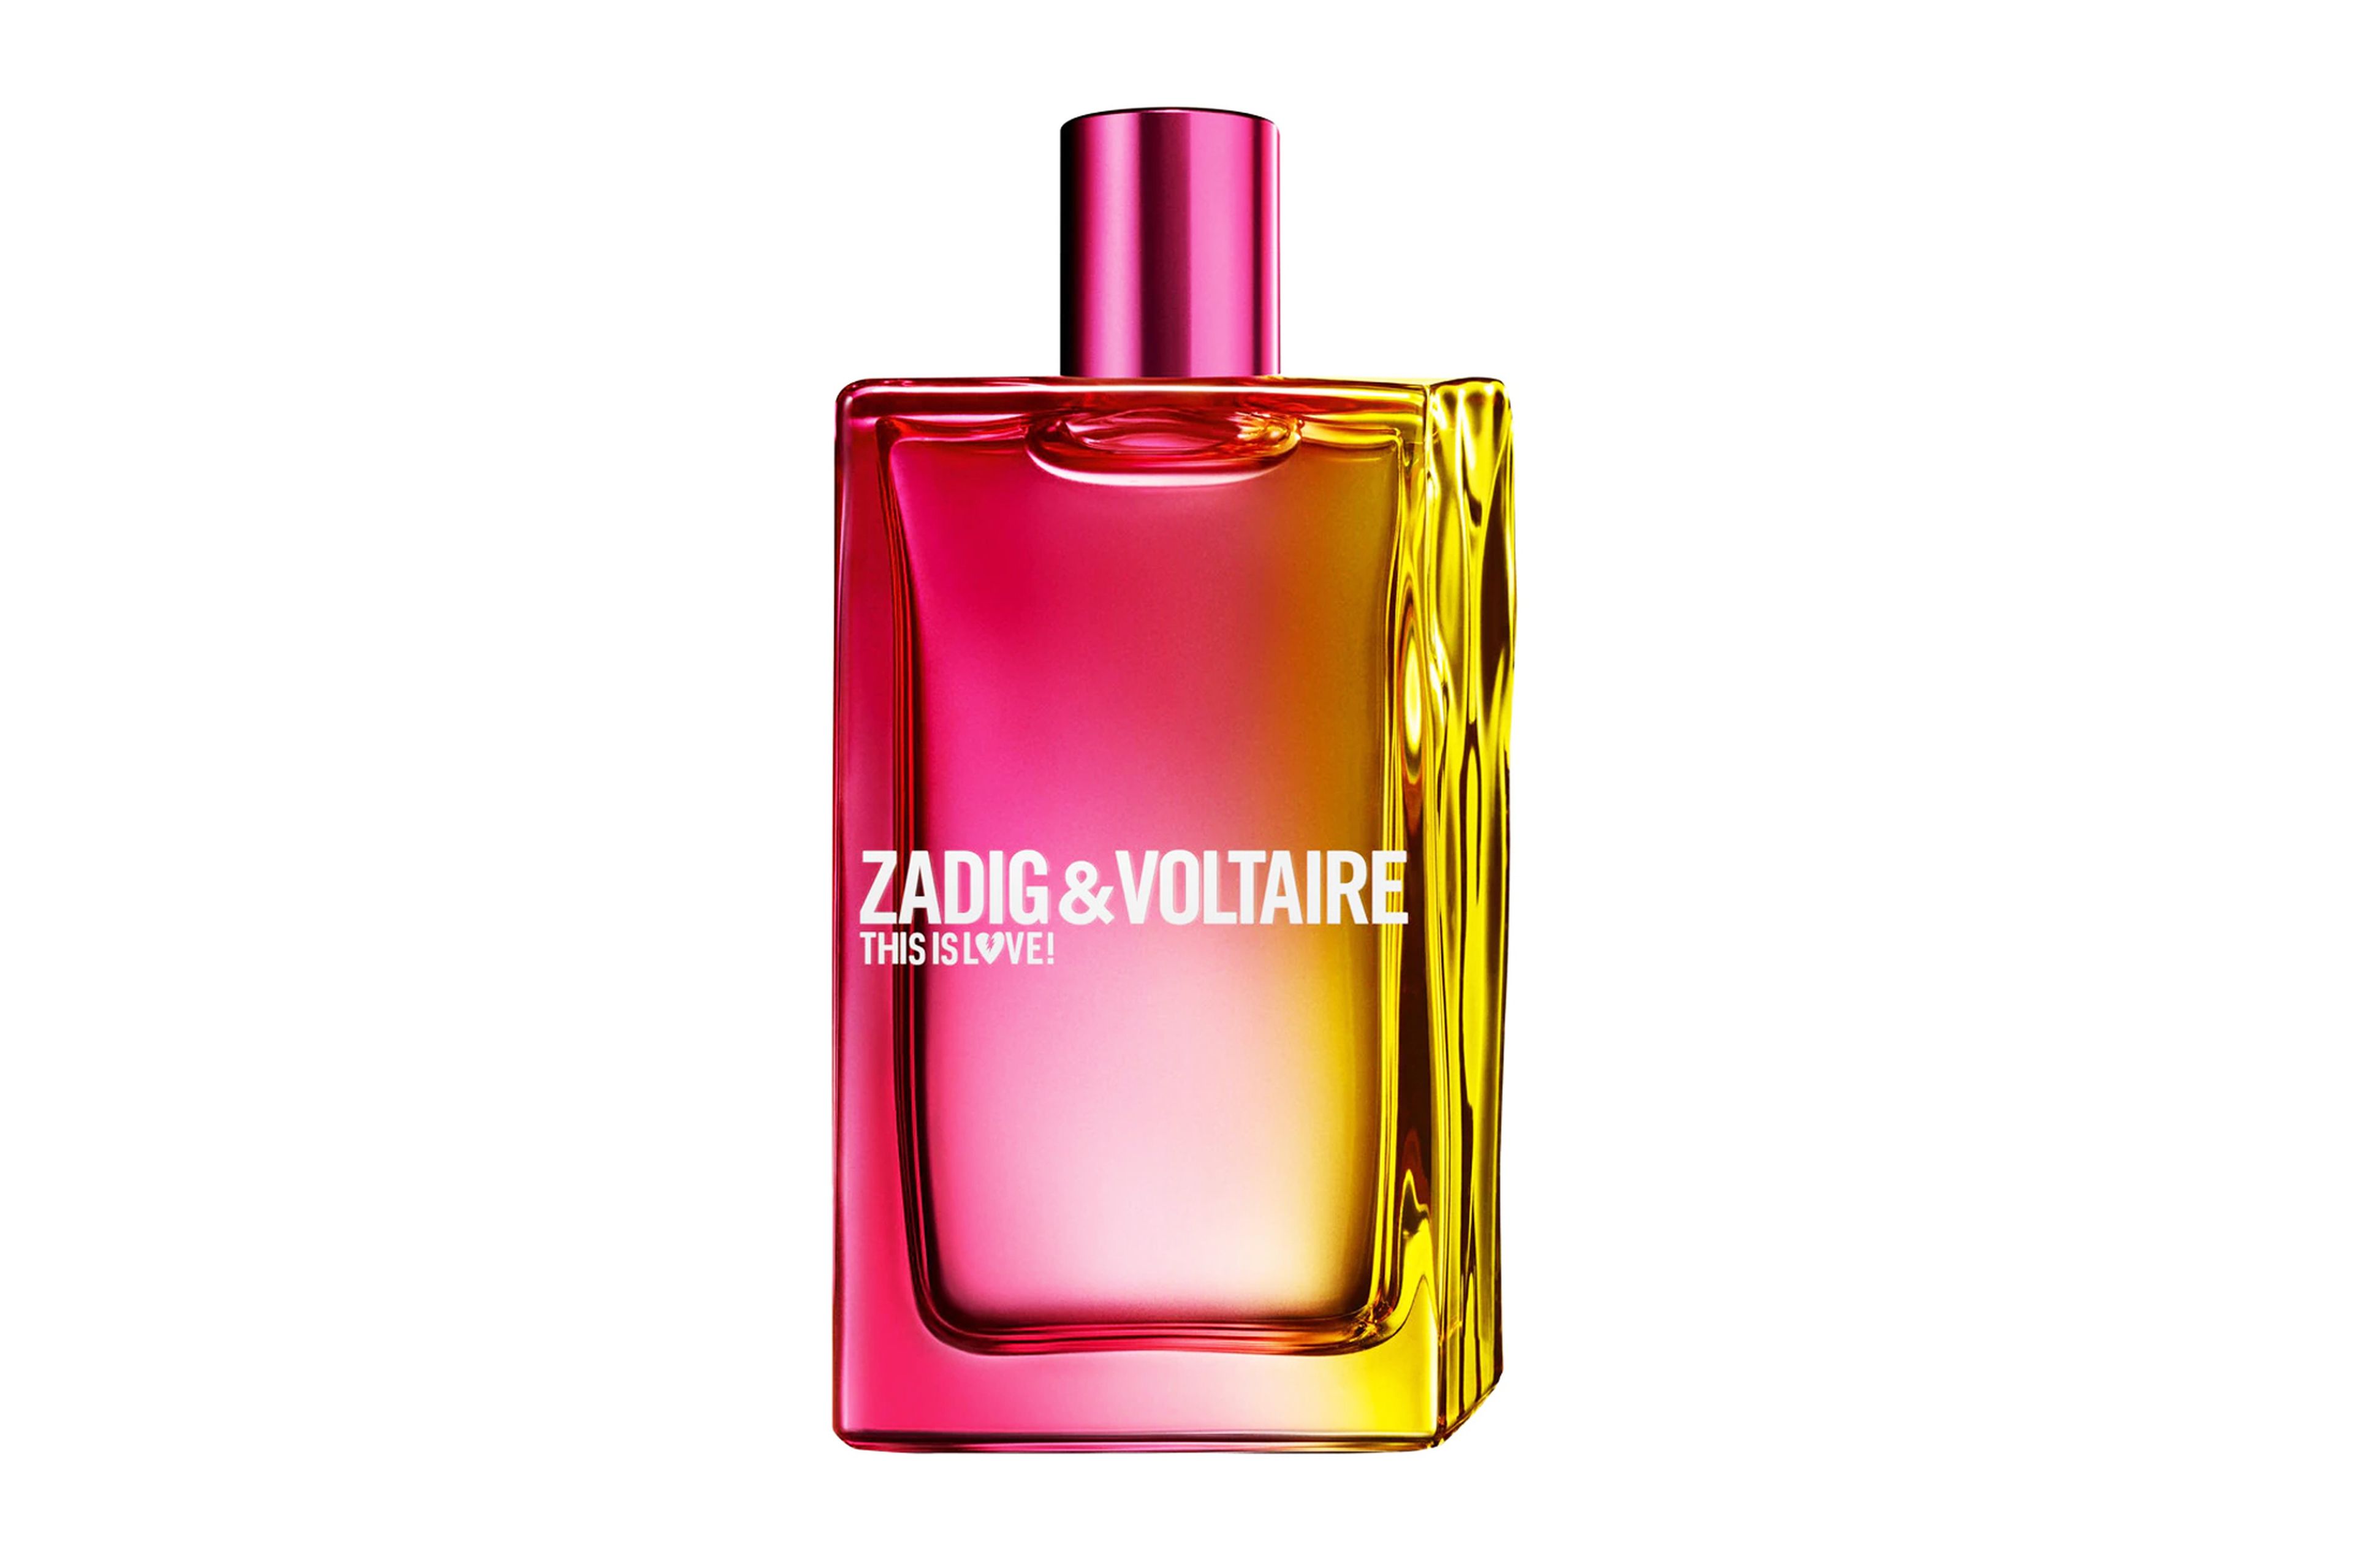 This Is Love!  by Zadig & Voltaire